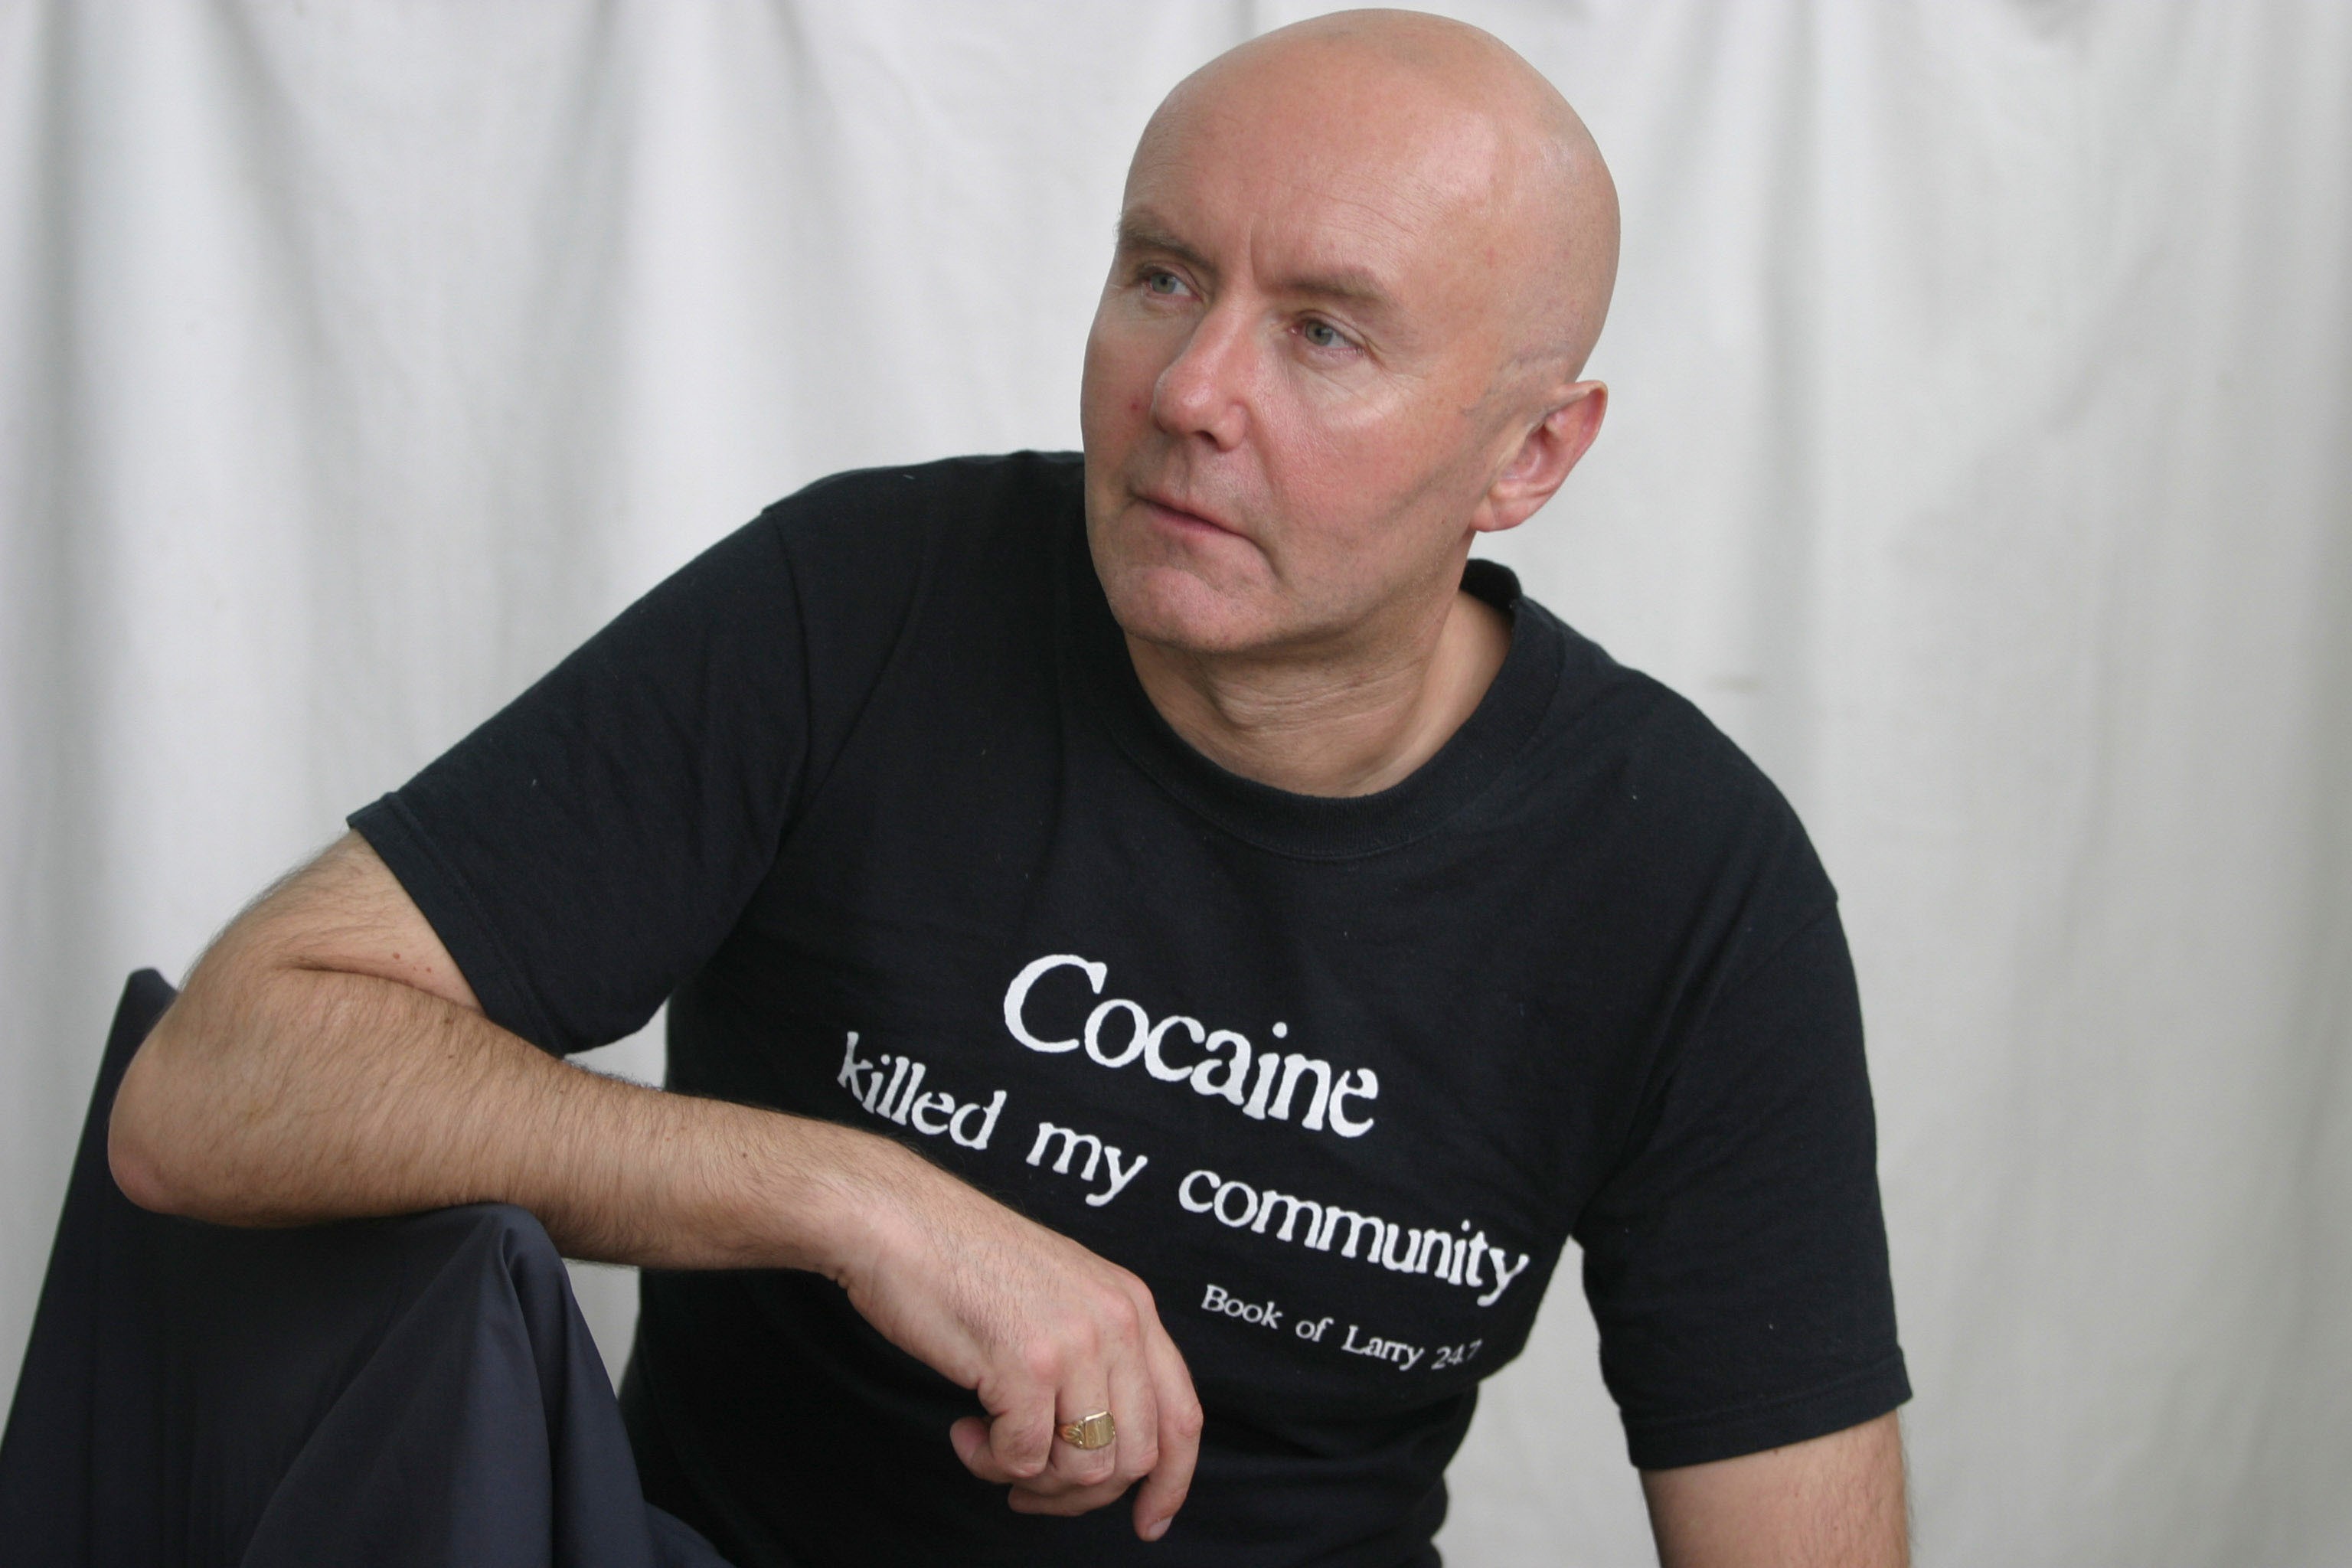 Drugs, debauchery and untimely deaths: it’s business as usual in Irvine Welsh’s latest instalment in the successful series